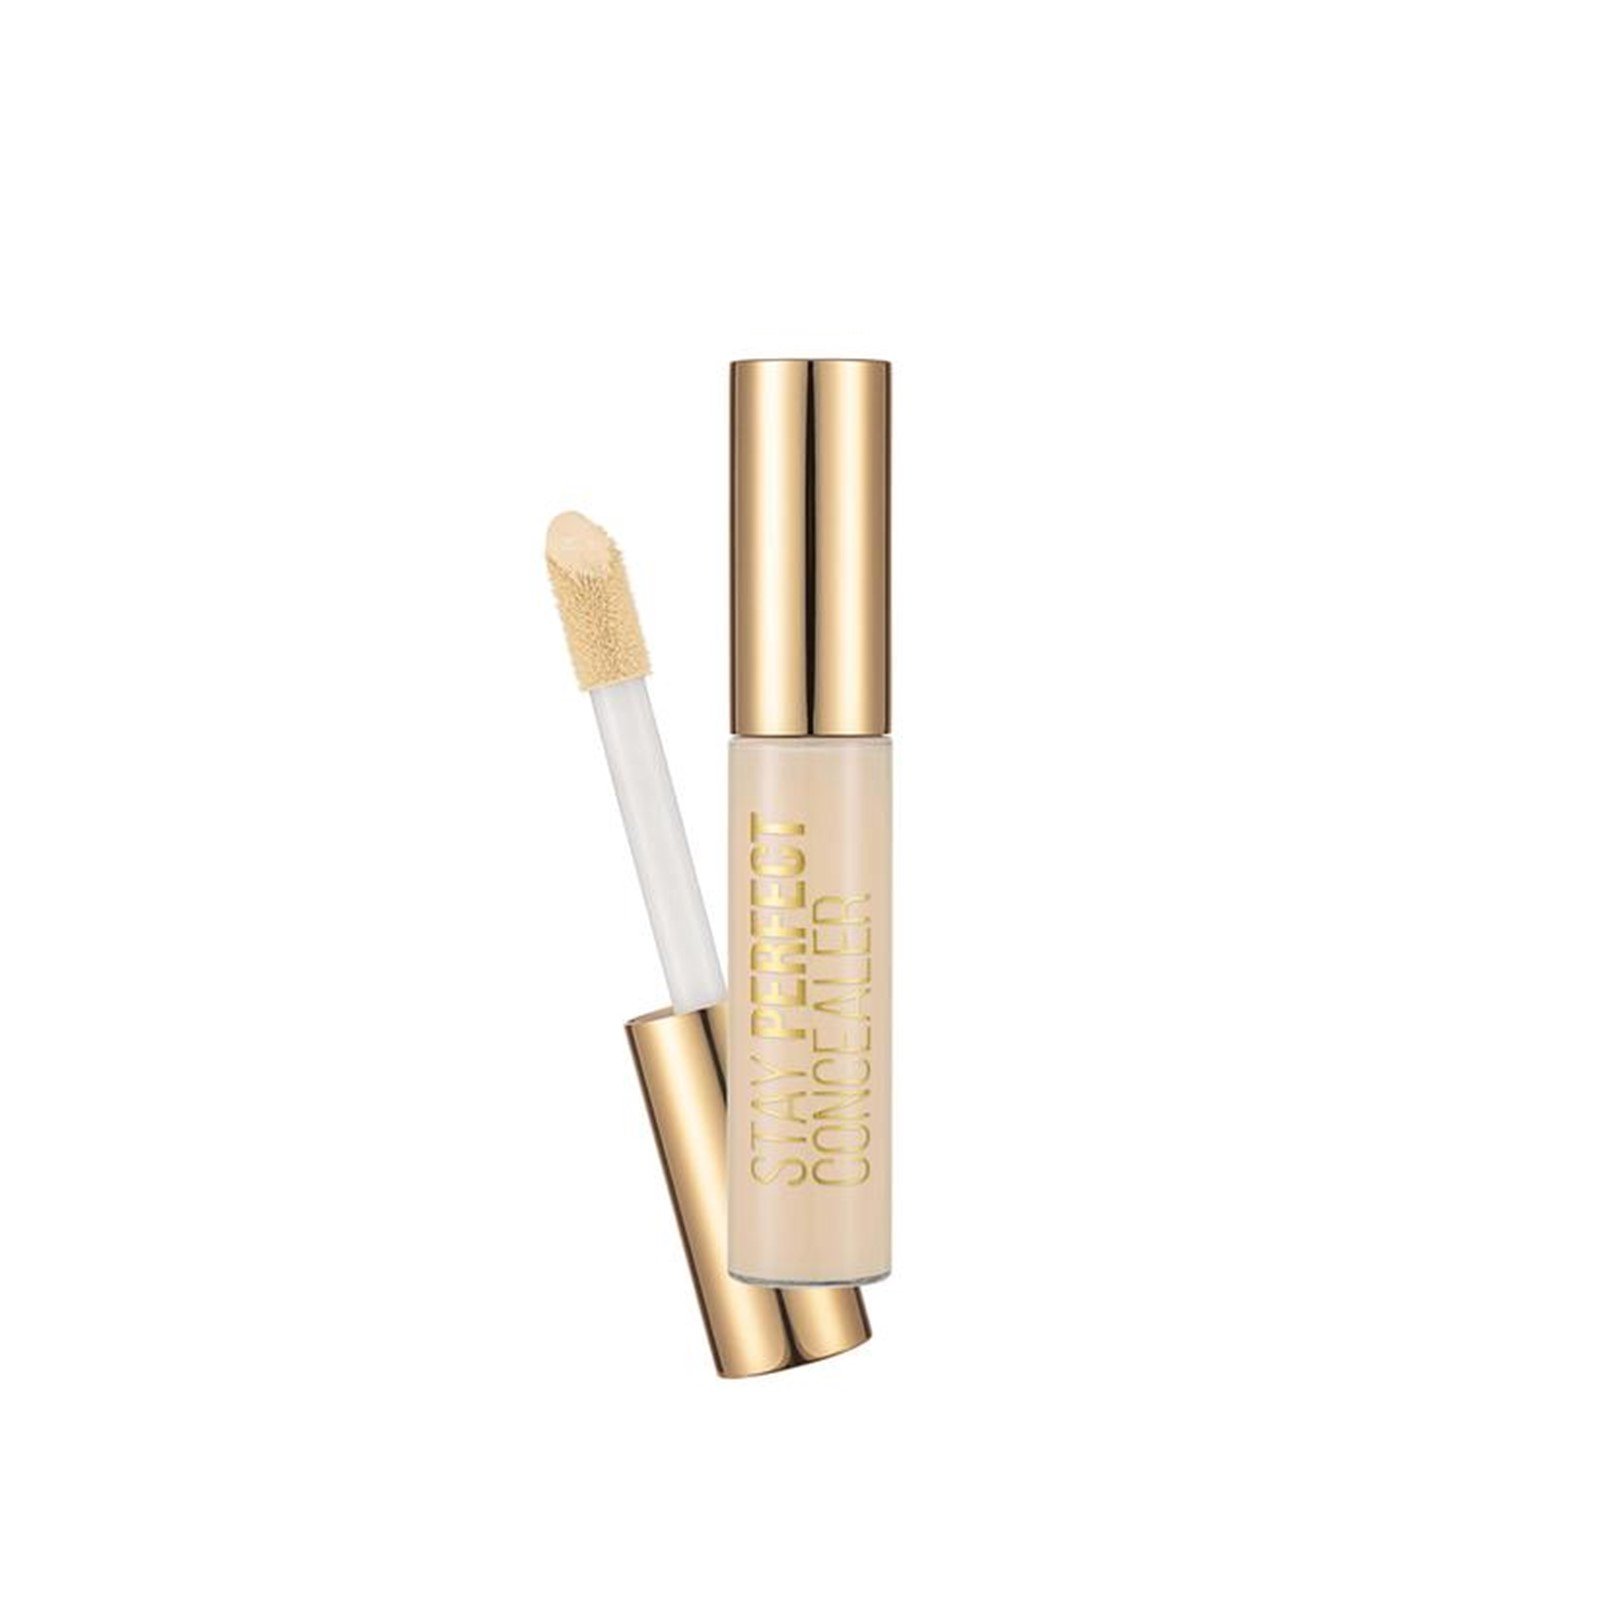 https://static.beautytocare.com/media/catalog/product/f/l/flormar-stay-perfect-concealer-001-fair-12-5ml.jpg